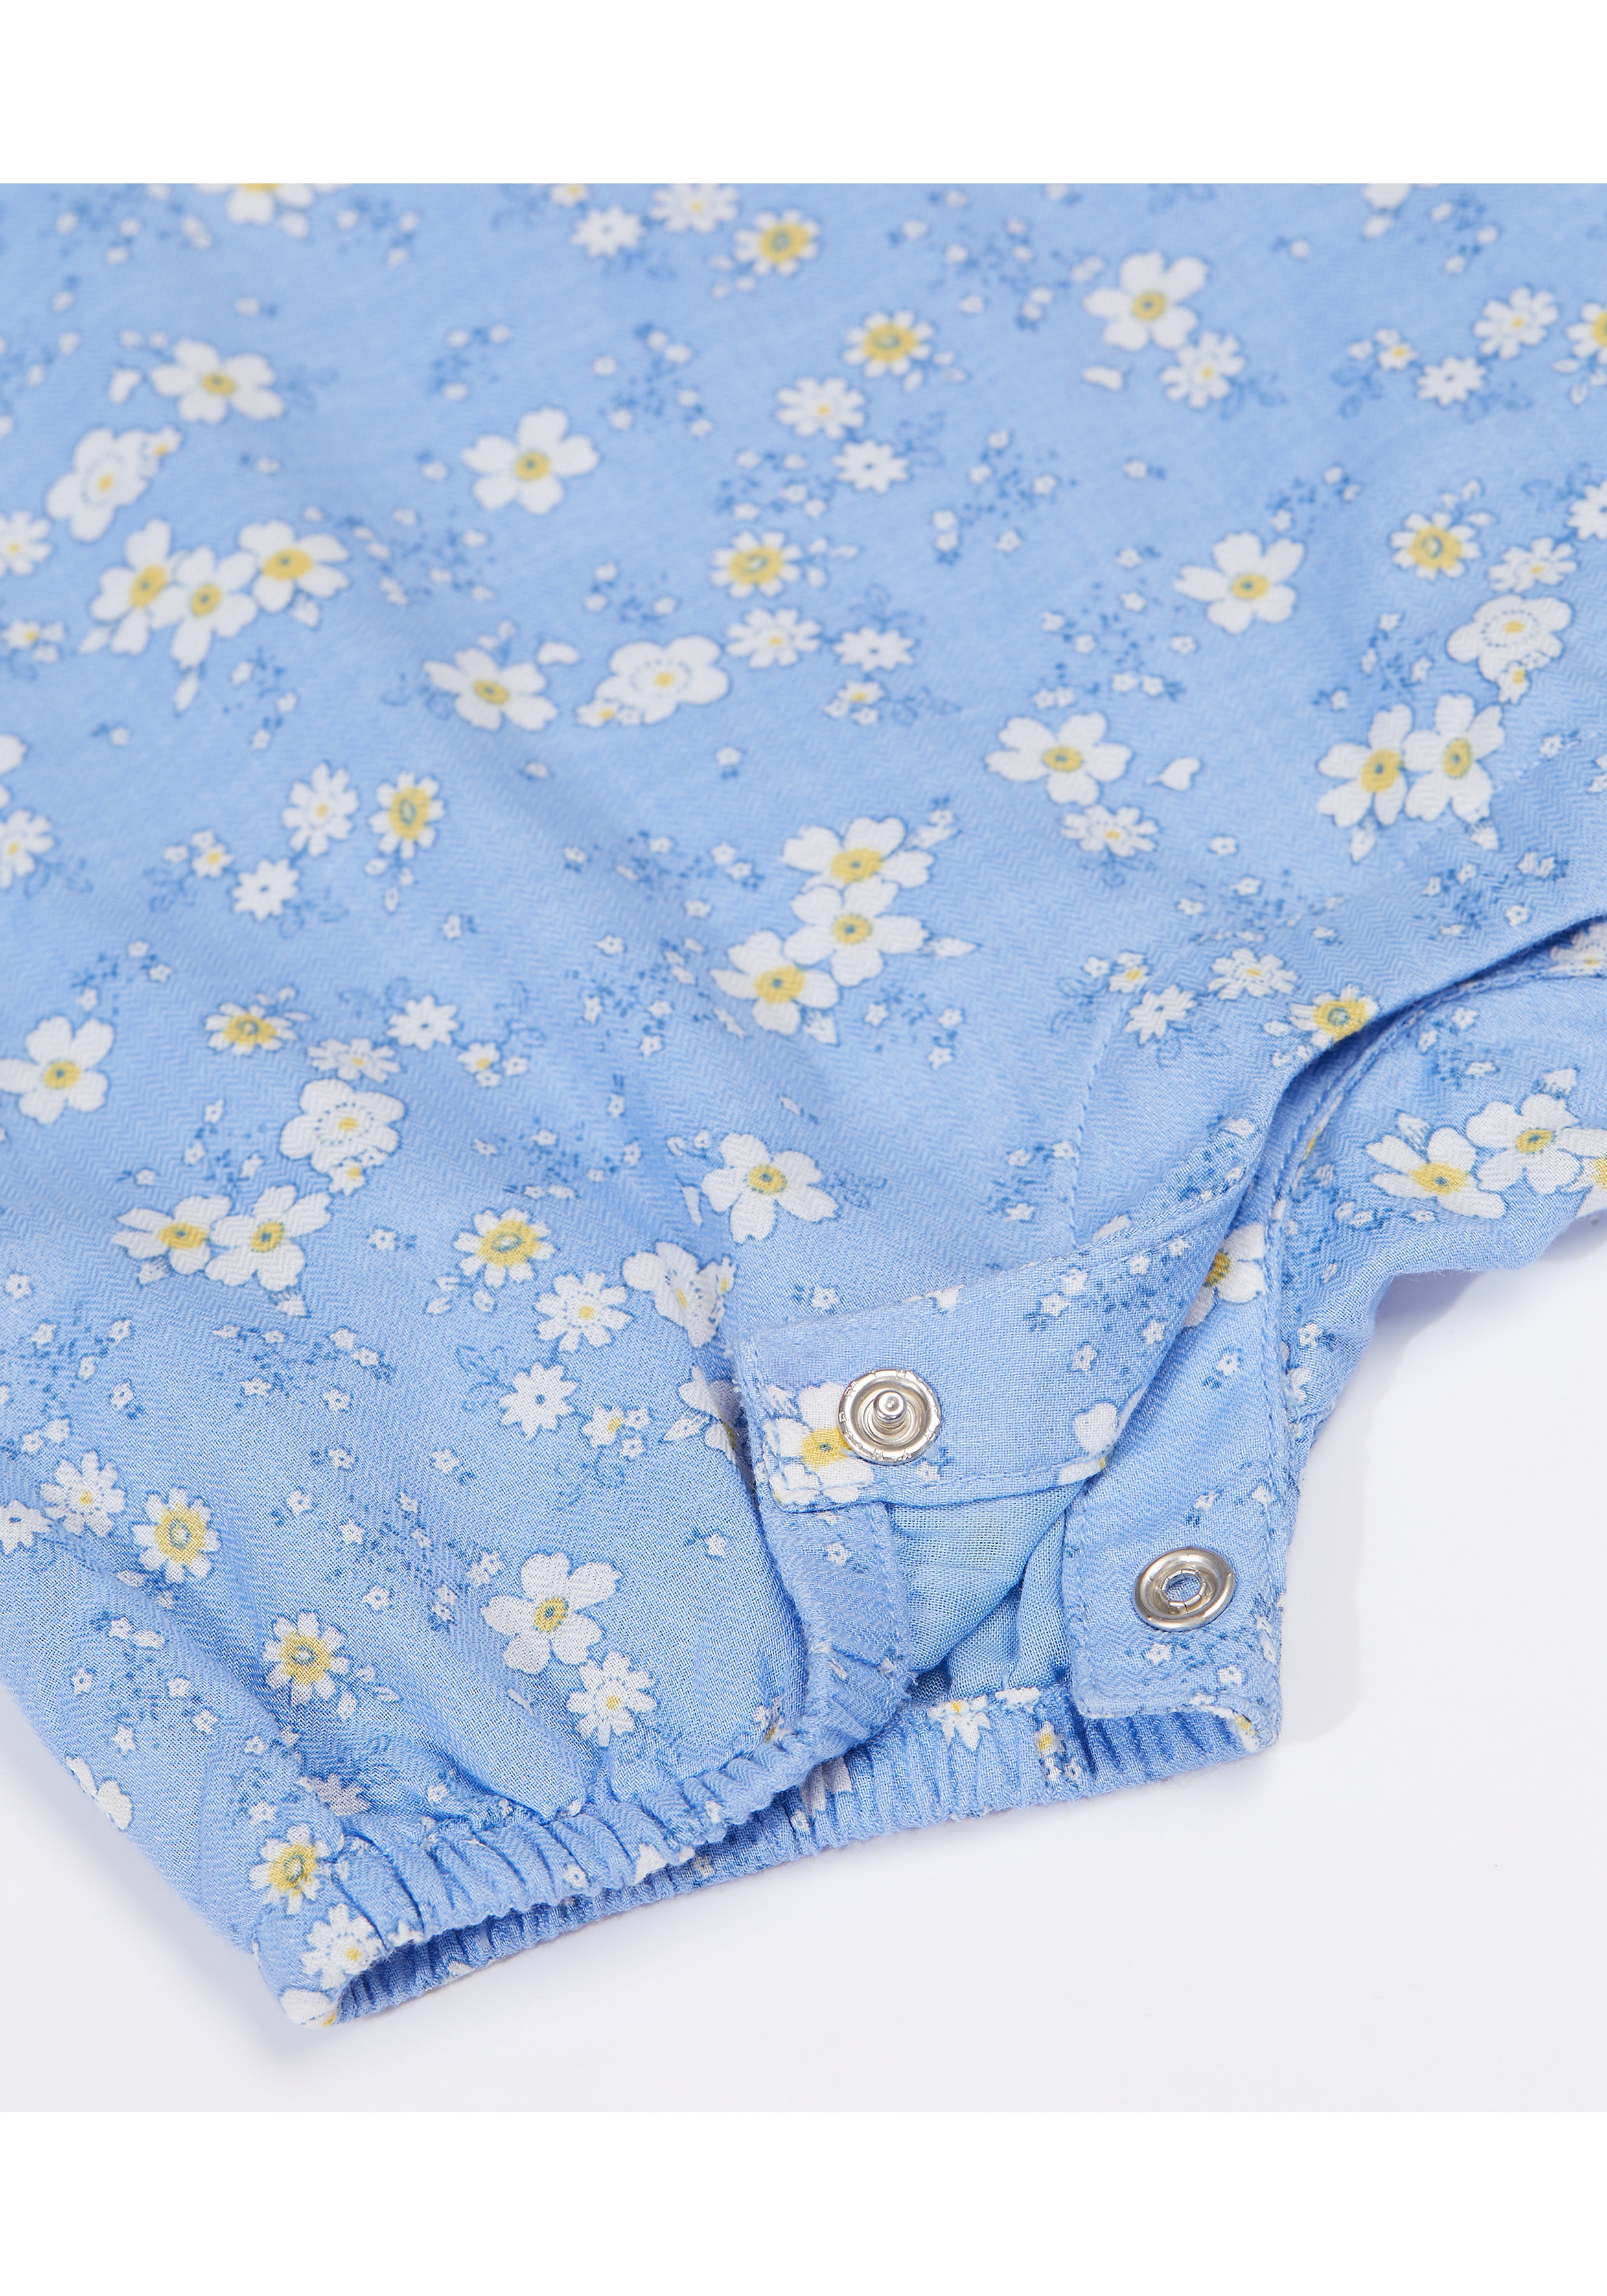 Mothercare | Girls Half Sleeves Dungaree Set Floral Print - Blue Yellow 3